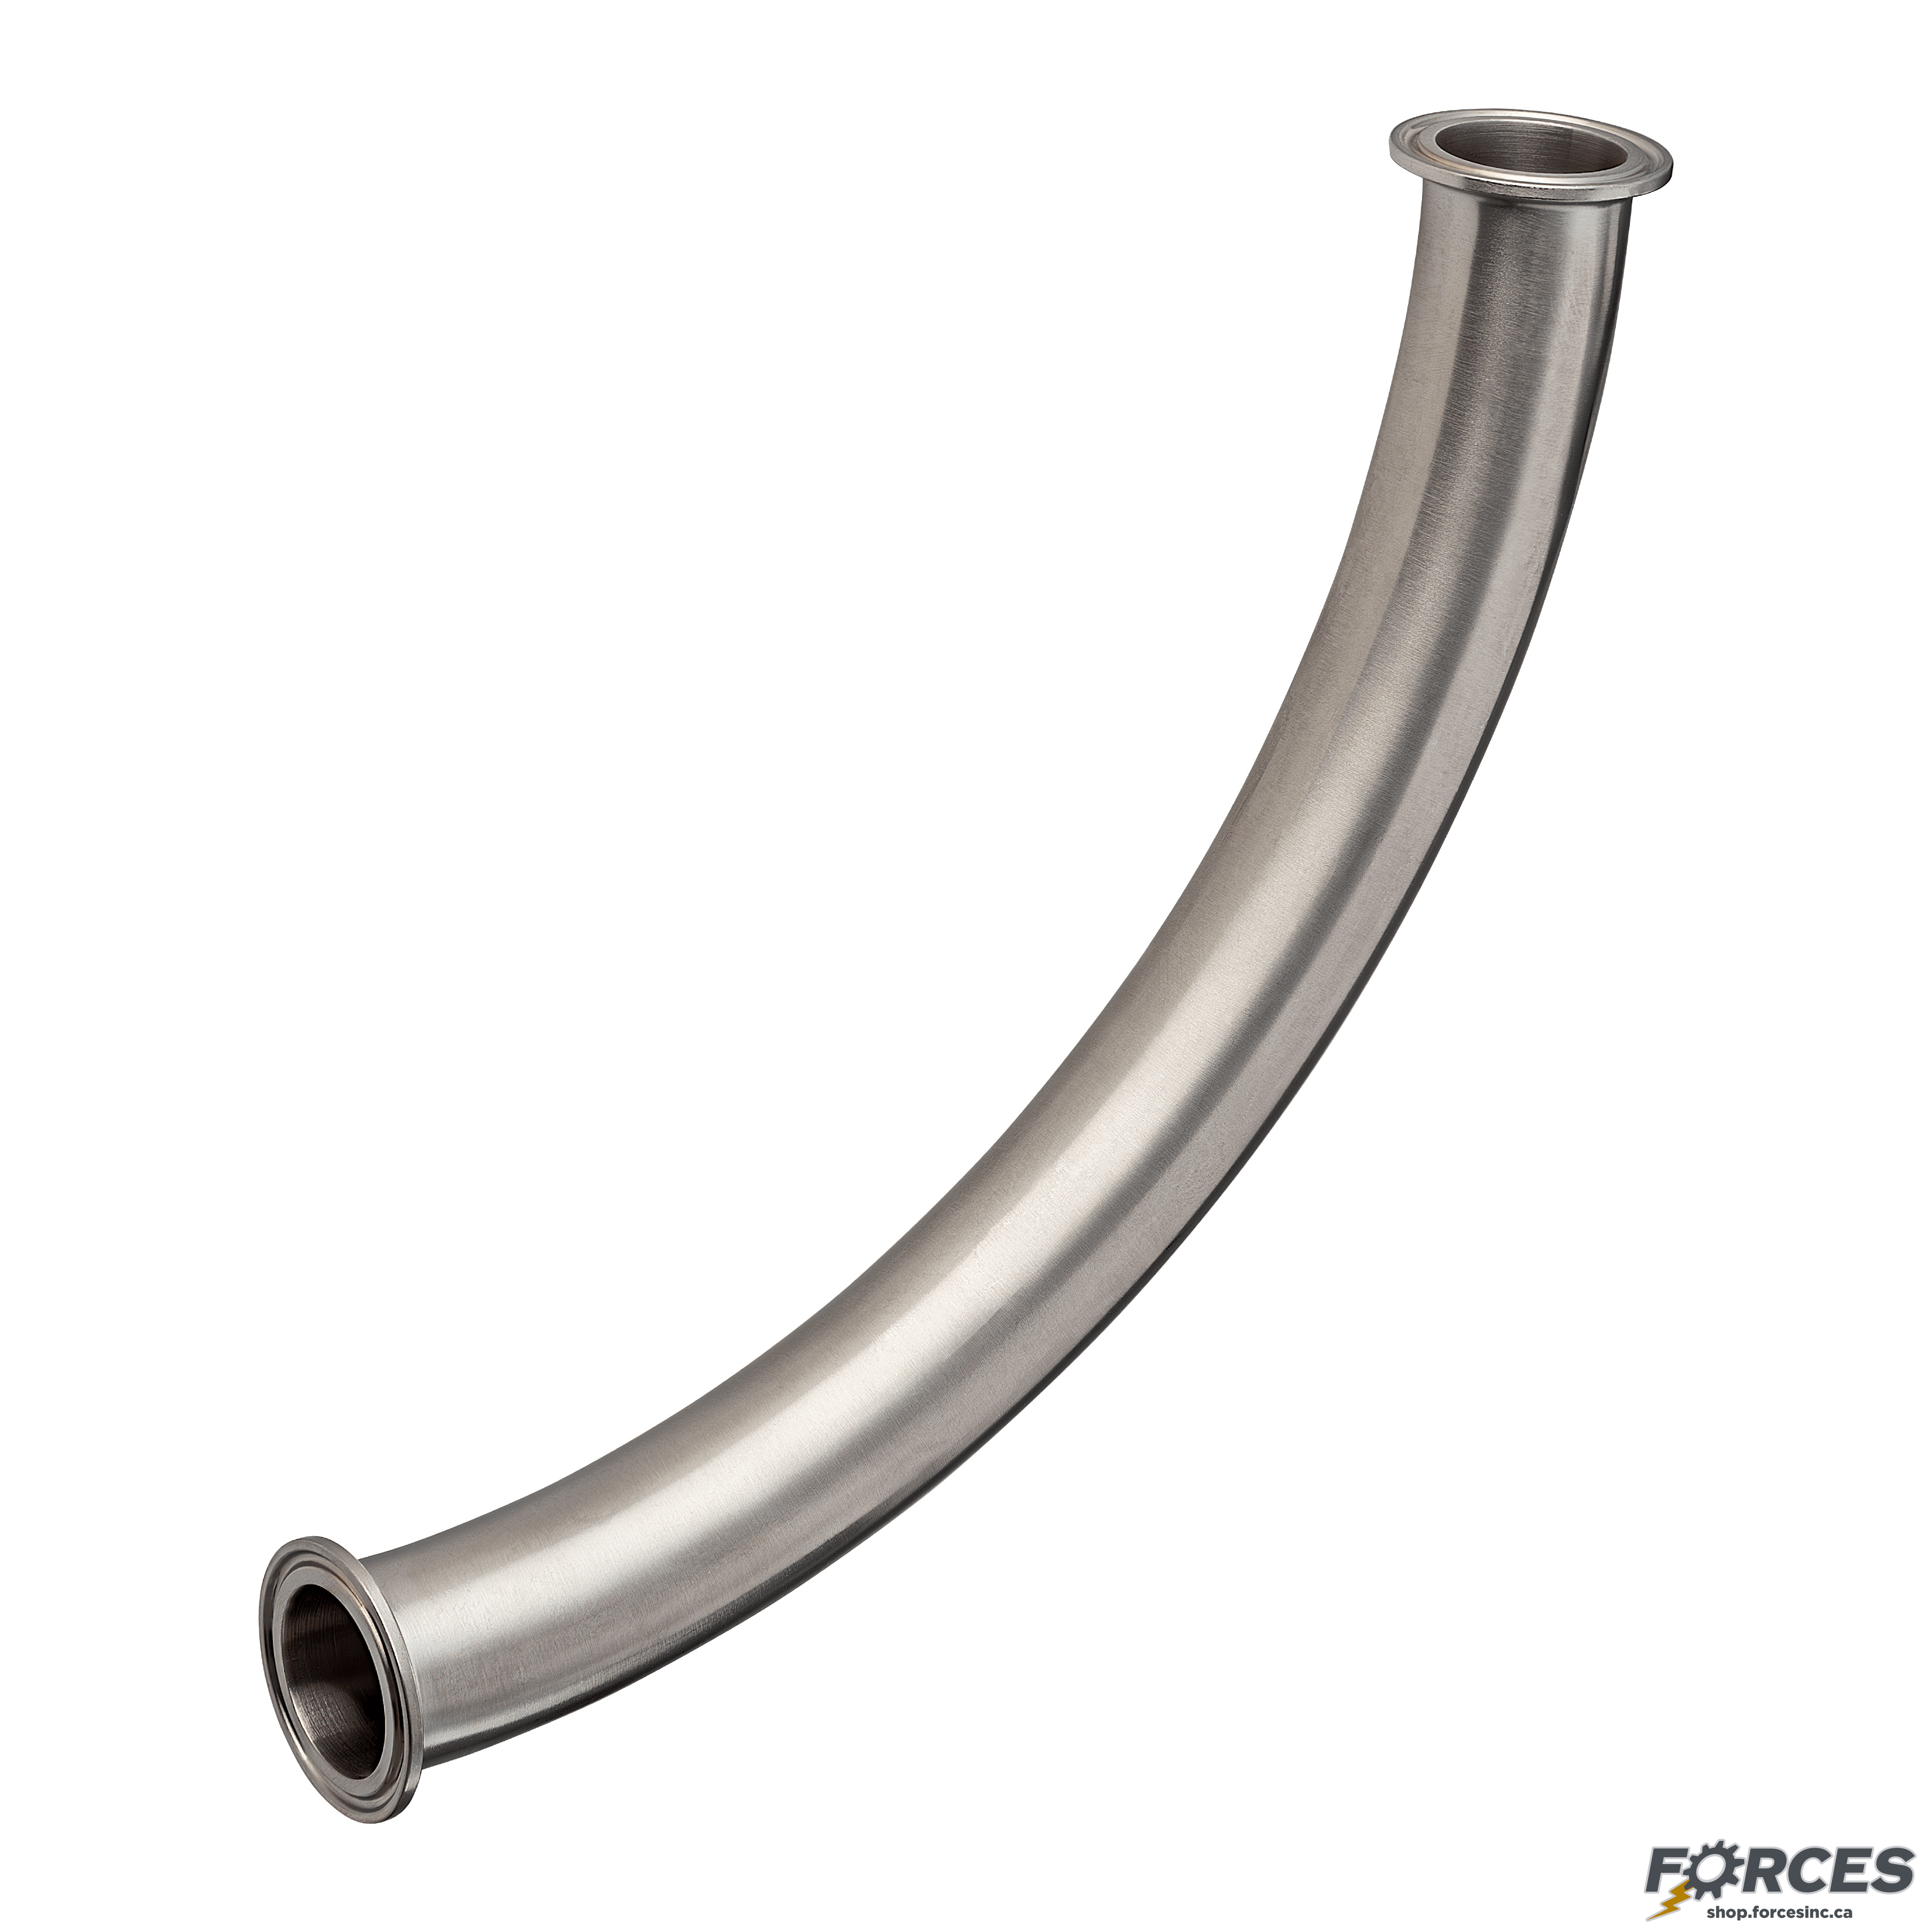 2" x 8-1/2" Tri-Clamp 90° Elbow Long Radius - Stainless Steel 304 - Forces Inc